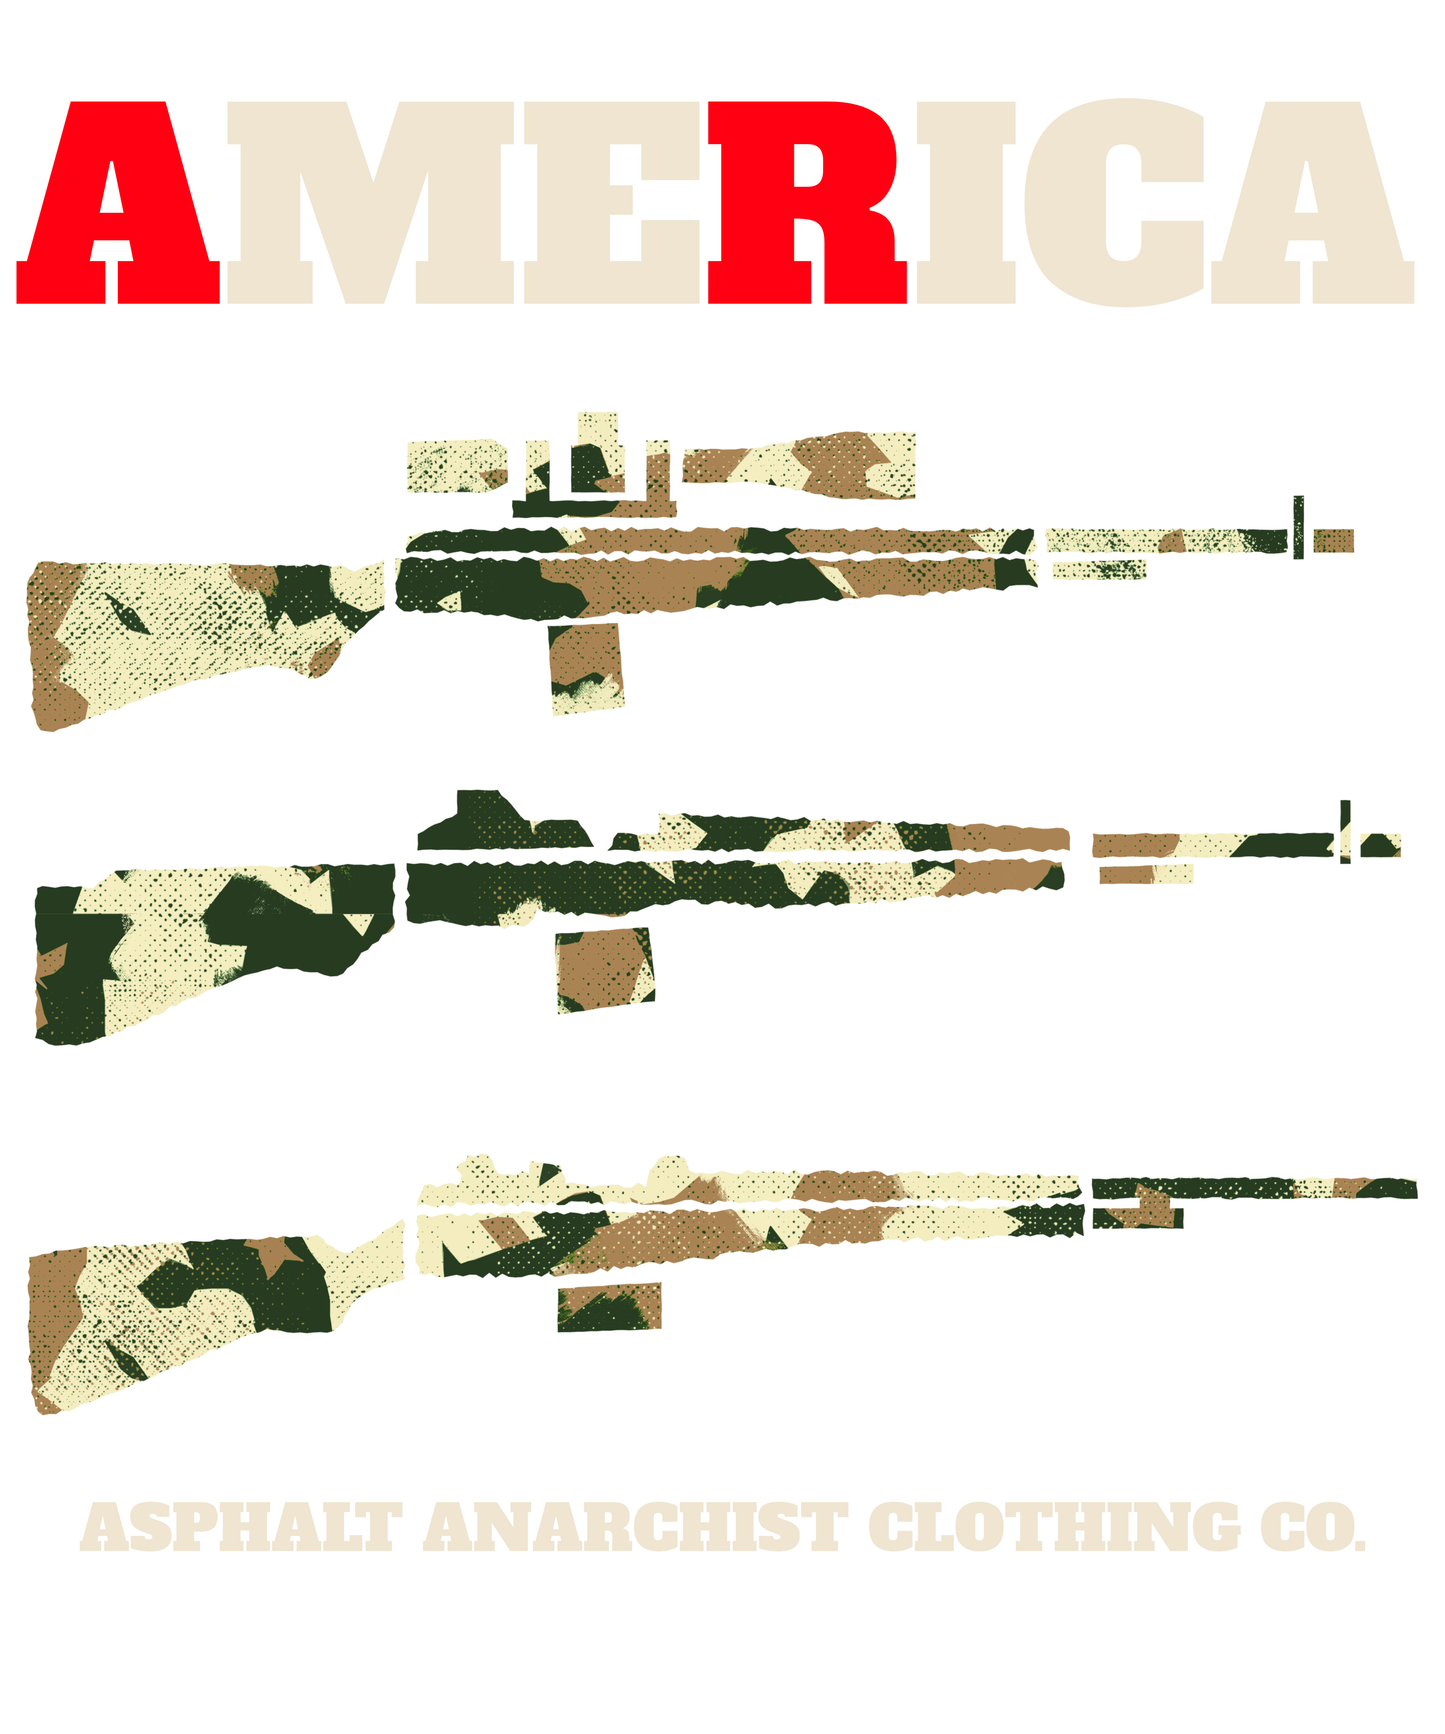 The AR America Tee from Asphalt Anarchist Clothing Co. HOT ROD KUSTOM KULTURE APPAREL & PRODUCTS